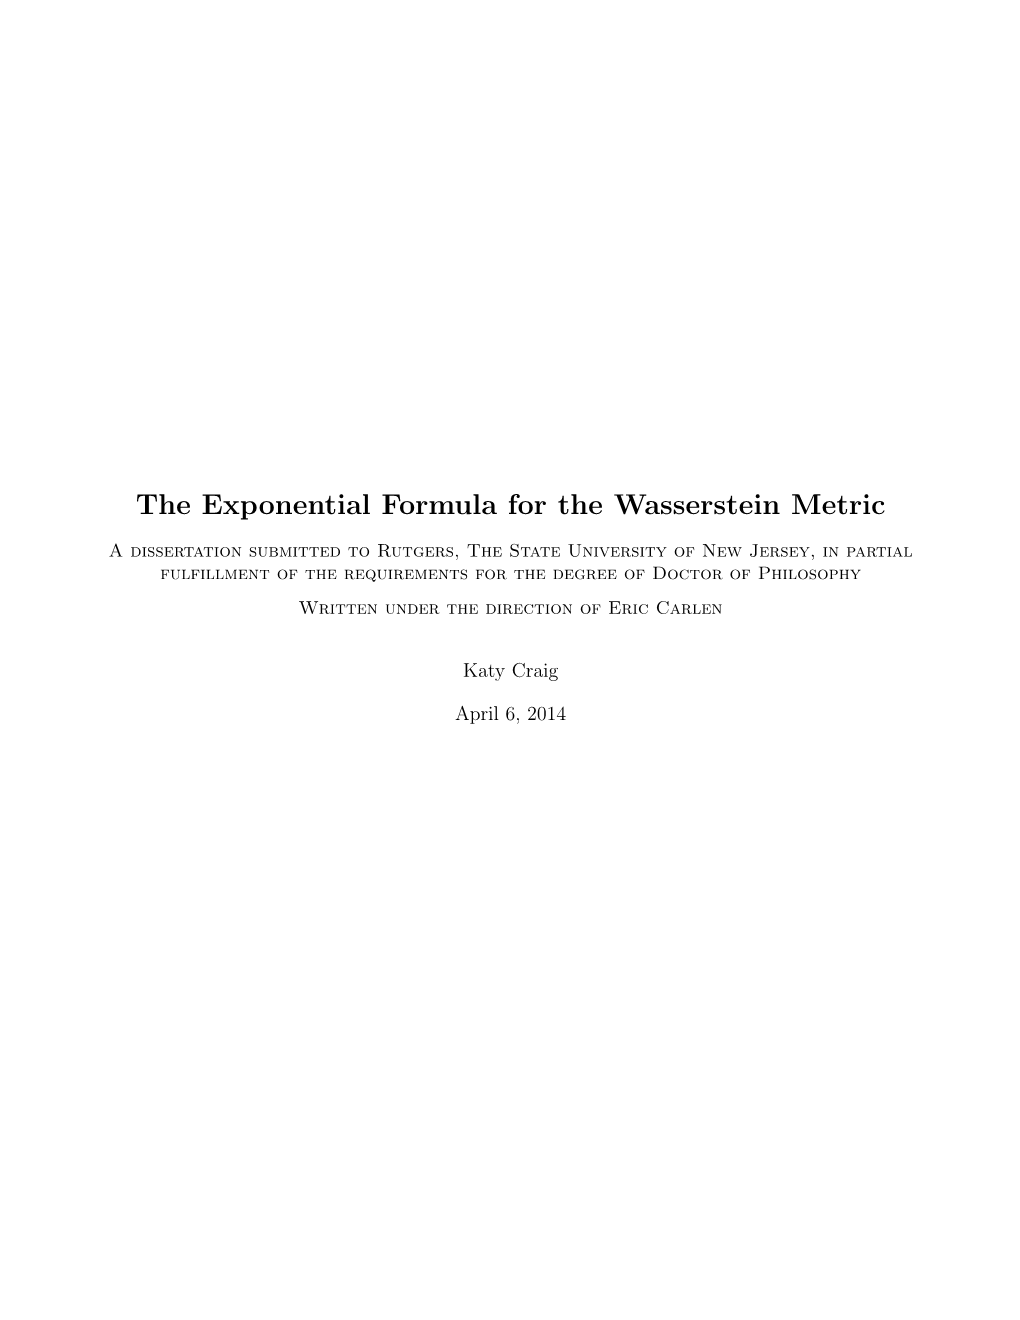 The Exponential Formula for the Wasserstein Metric